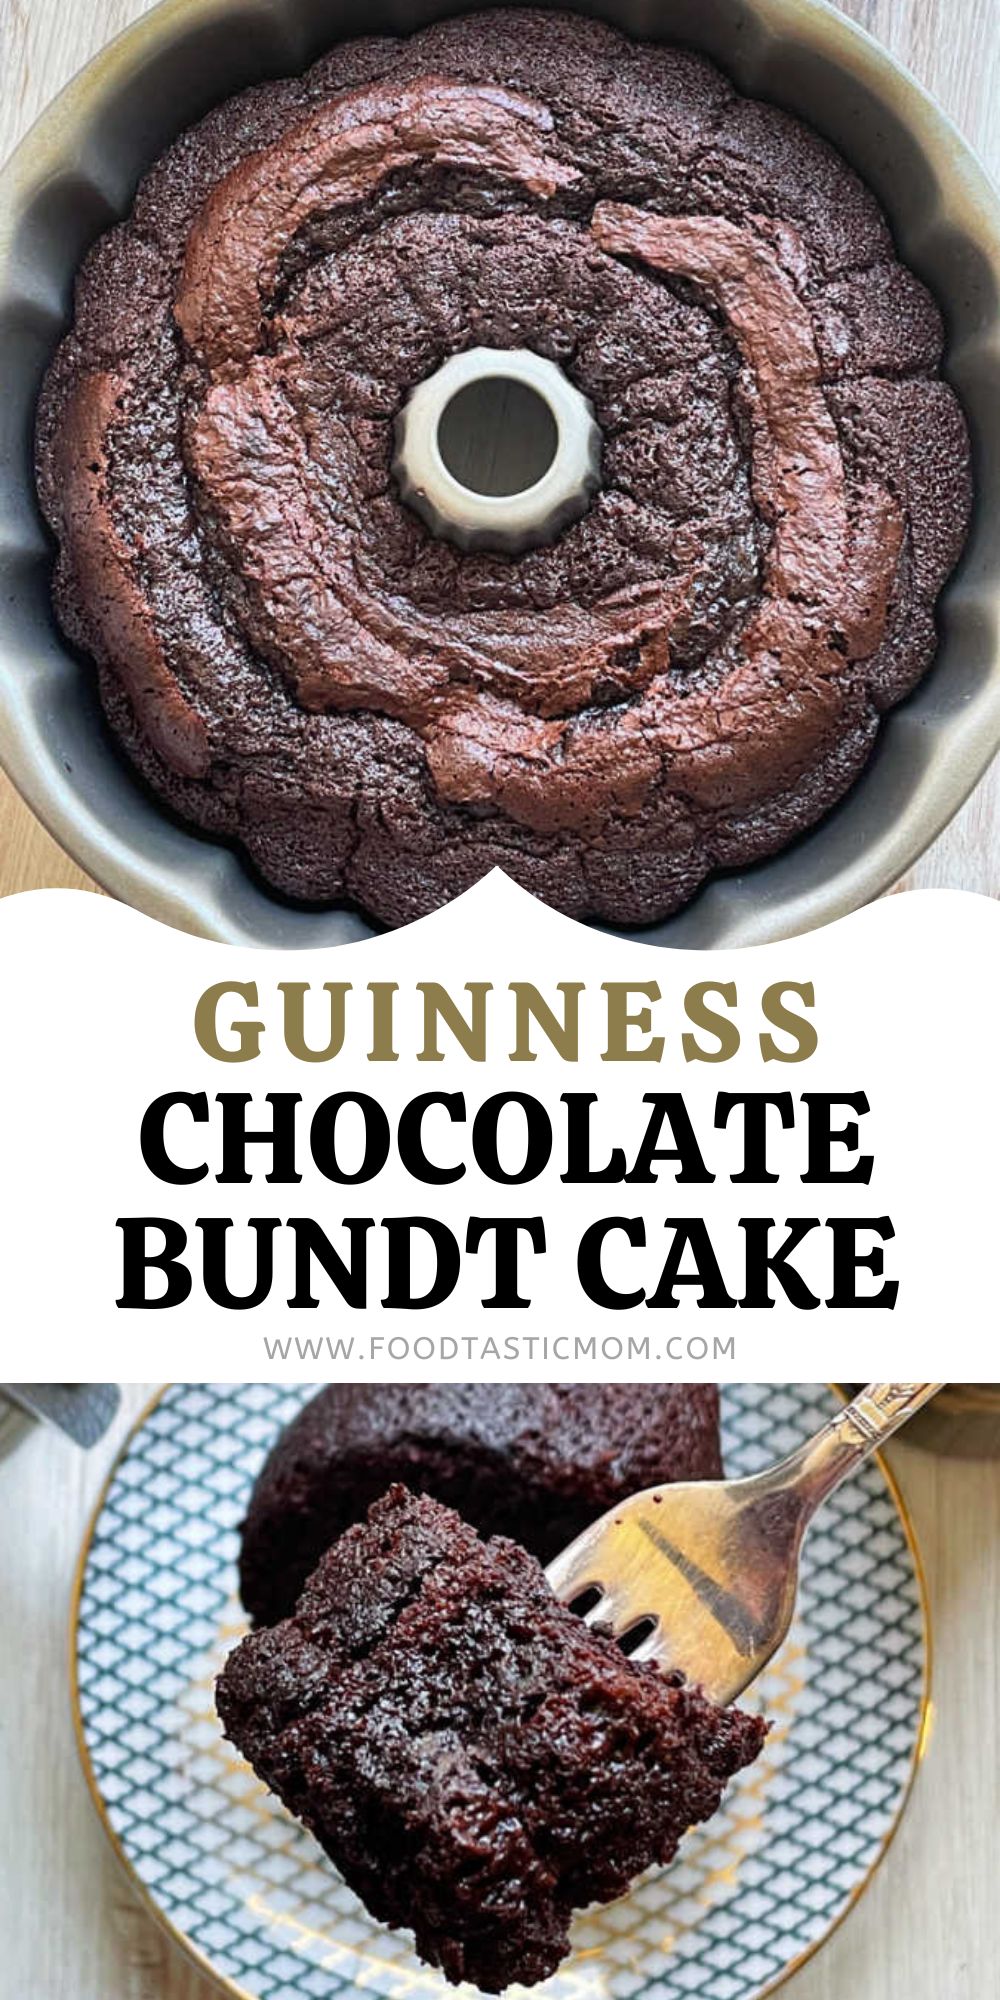 Guinness Chocolate Bundt Cake is a very simple cake made super moist thanks to the full cup of Guinness beer in the batter. via @foodtasticmom